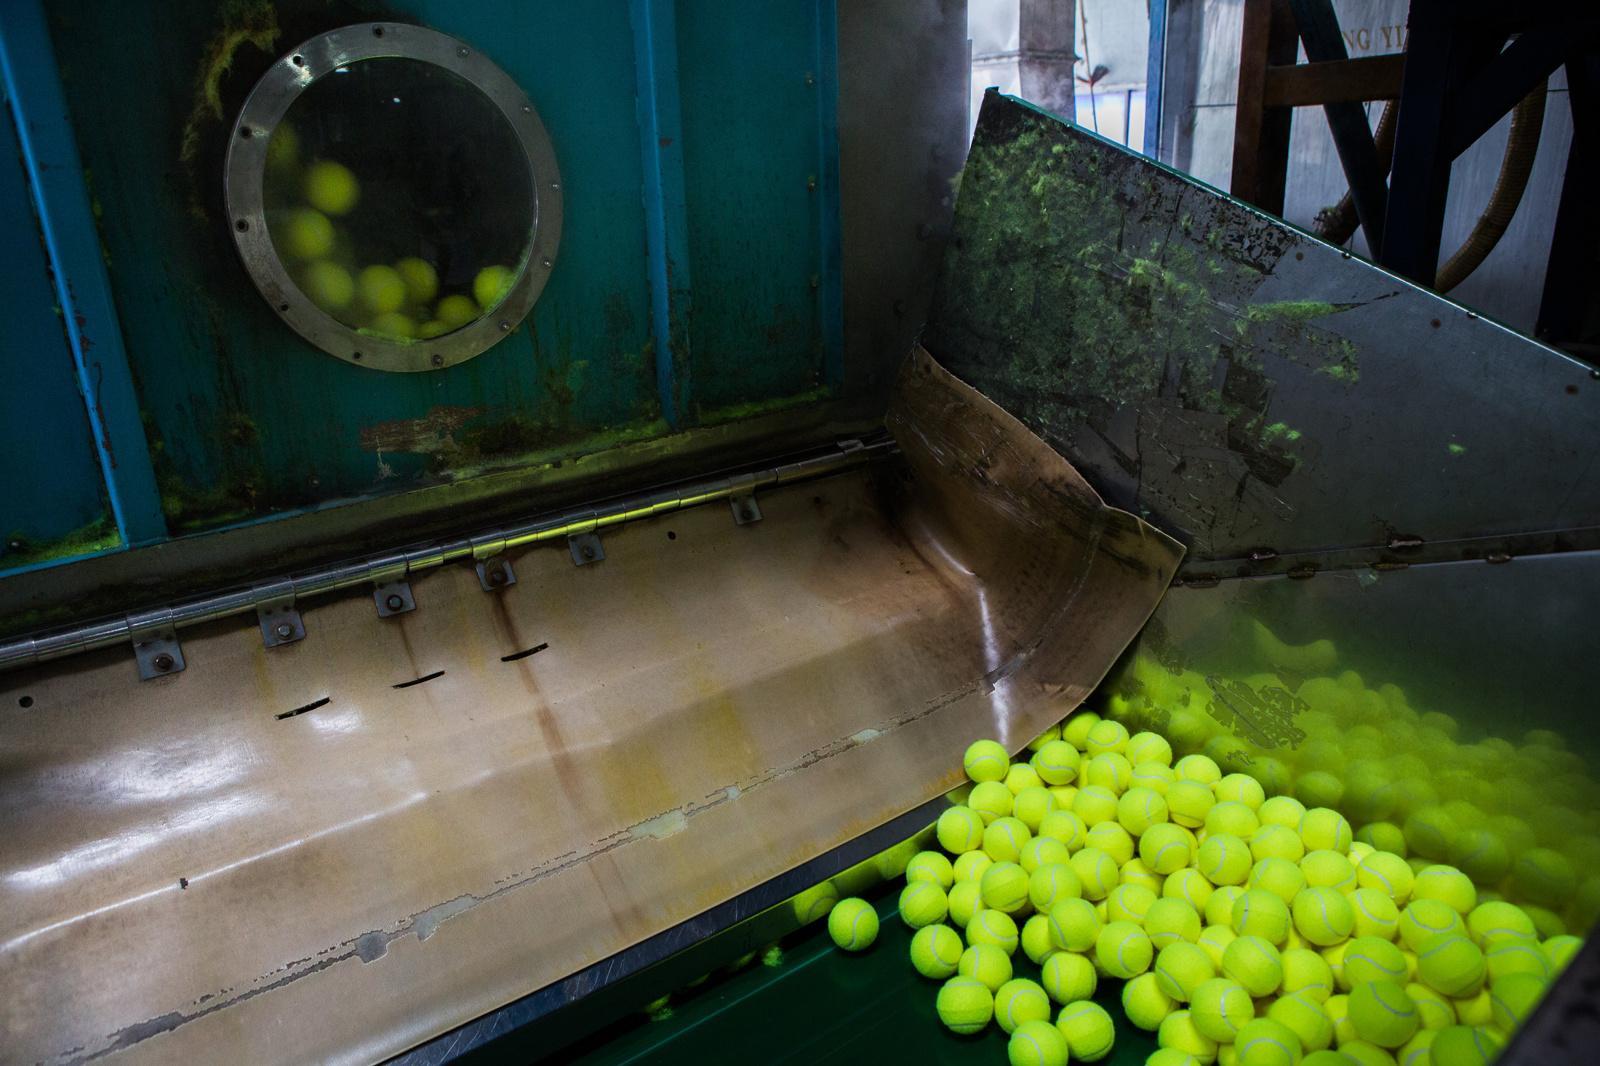 Wilson Tennis Ball Factory - For The New York Times - Nakhon Pathom, Thailand Ð August 18, 2016 : During...